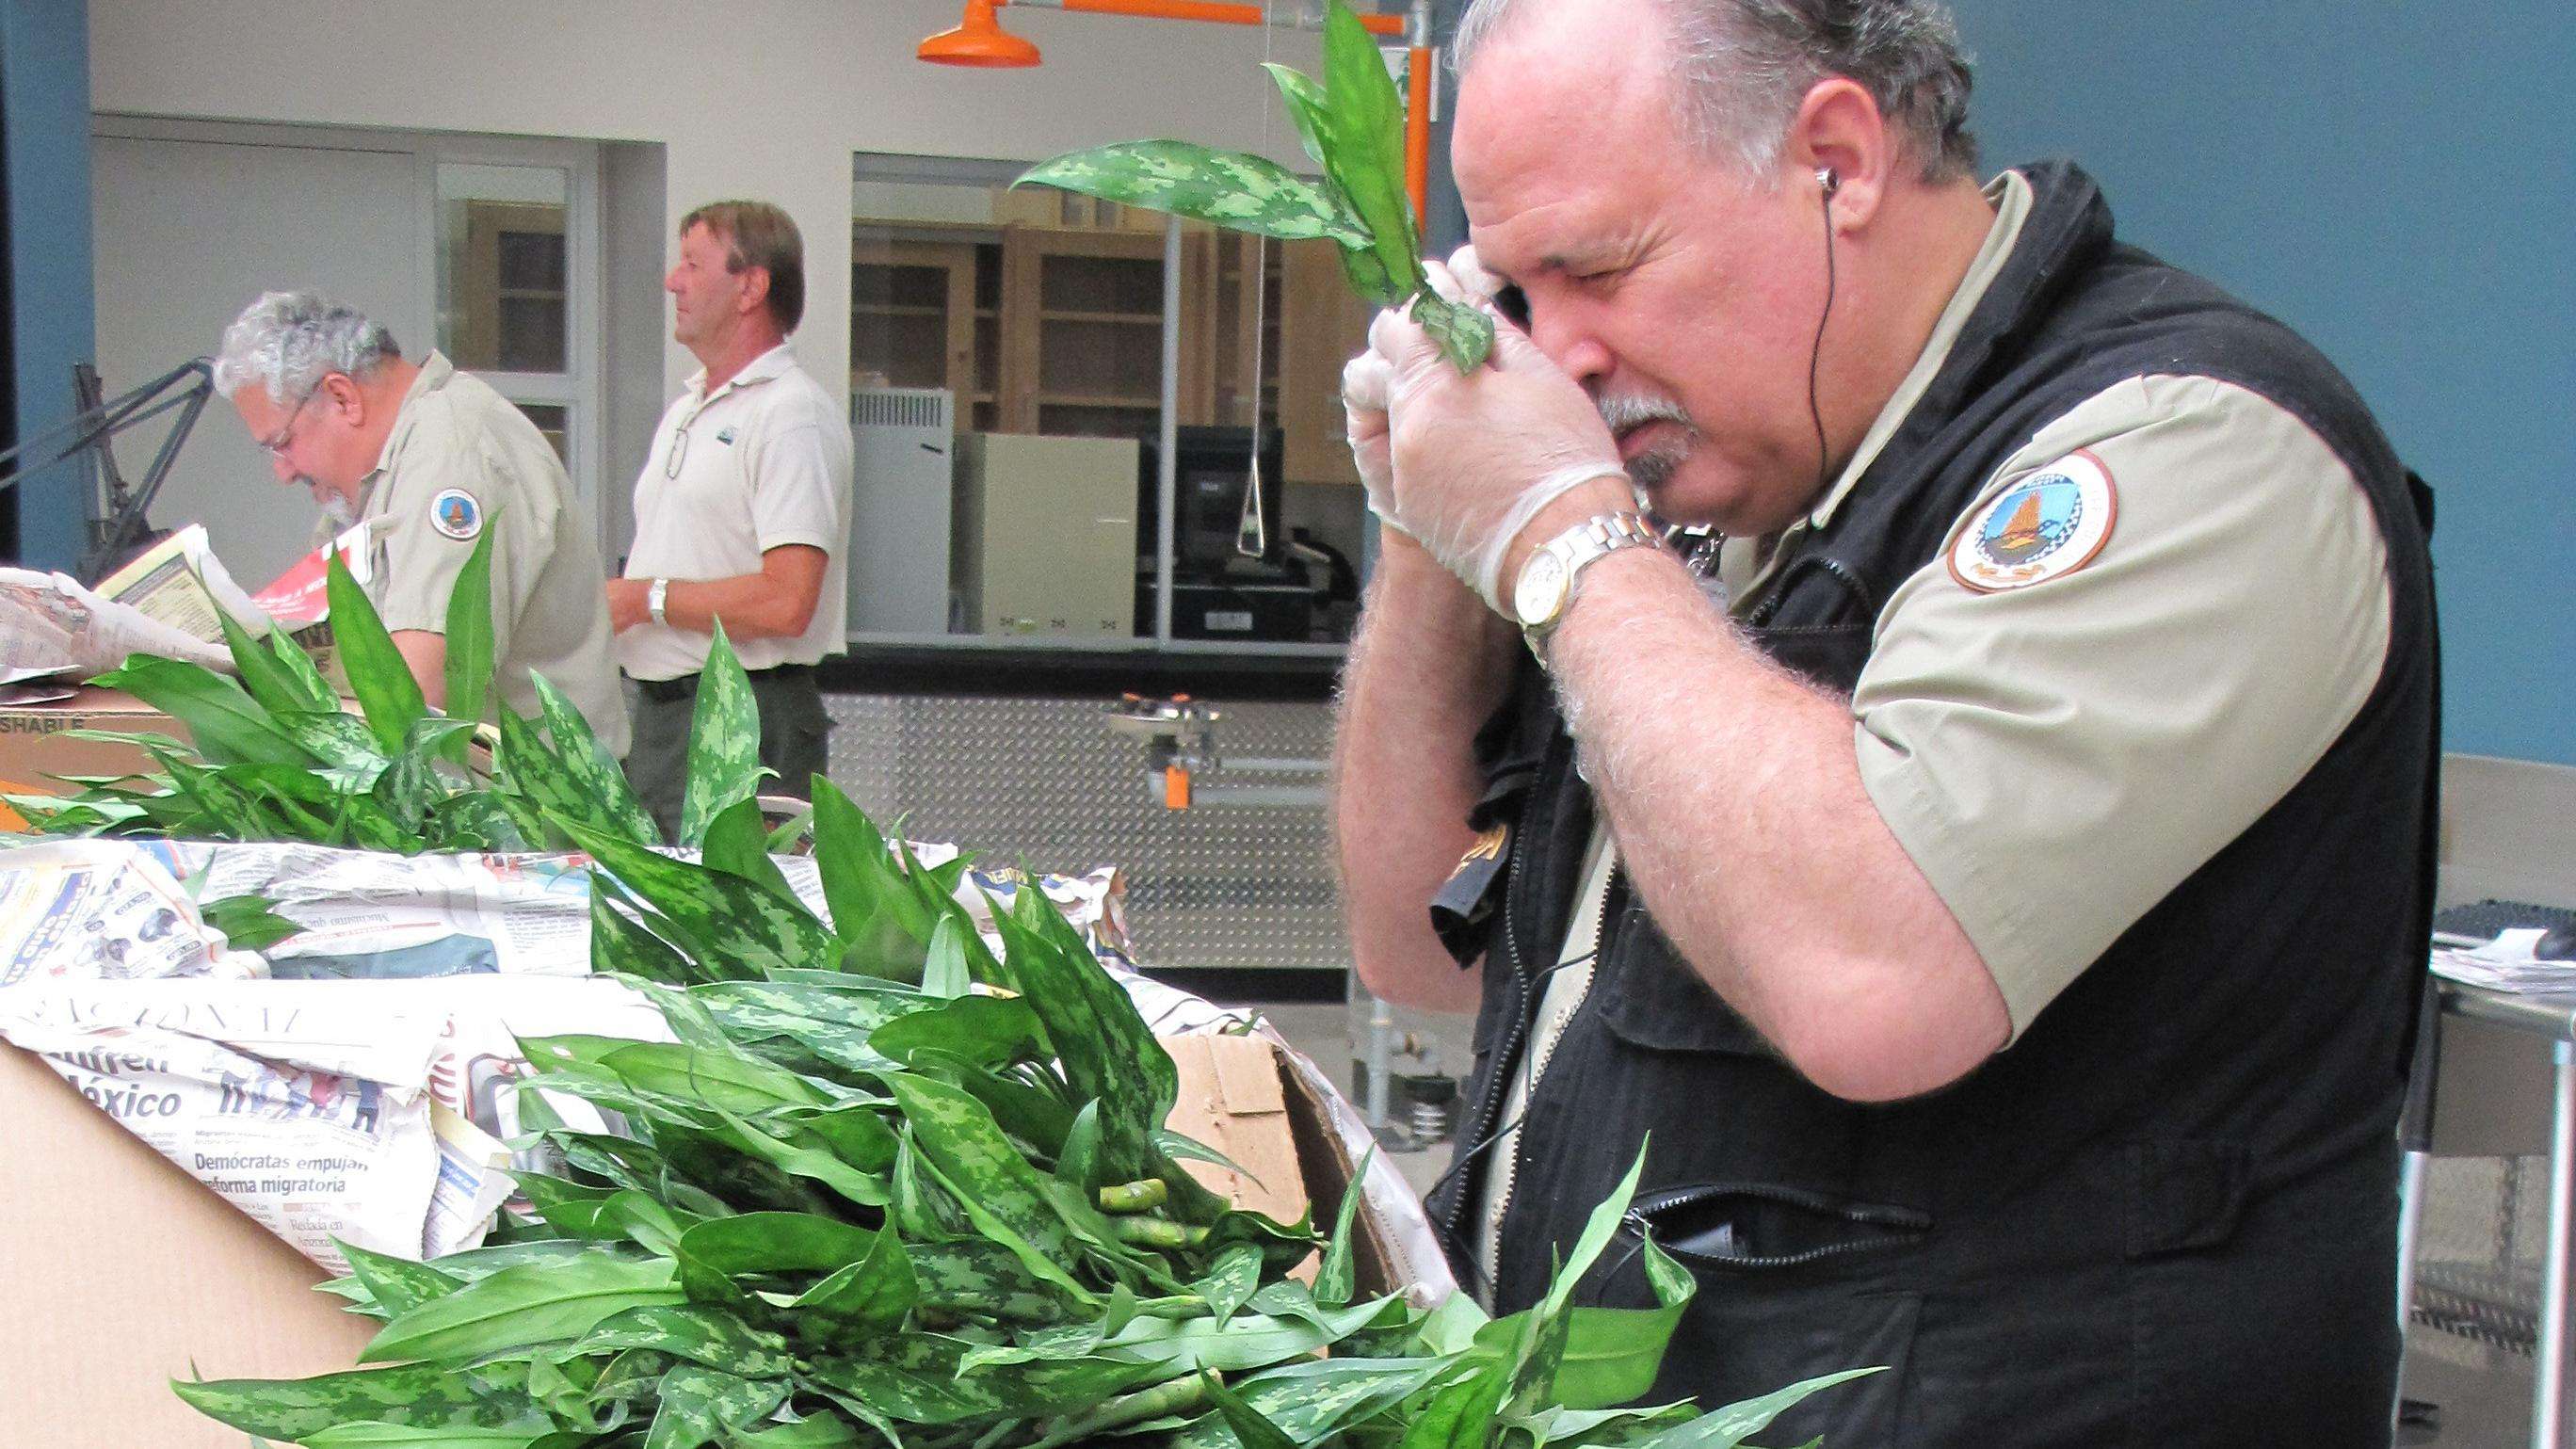 USDA inspector examining imported plant material at a U.S. port of entry.